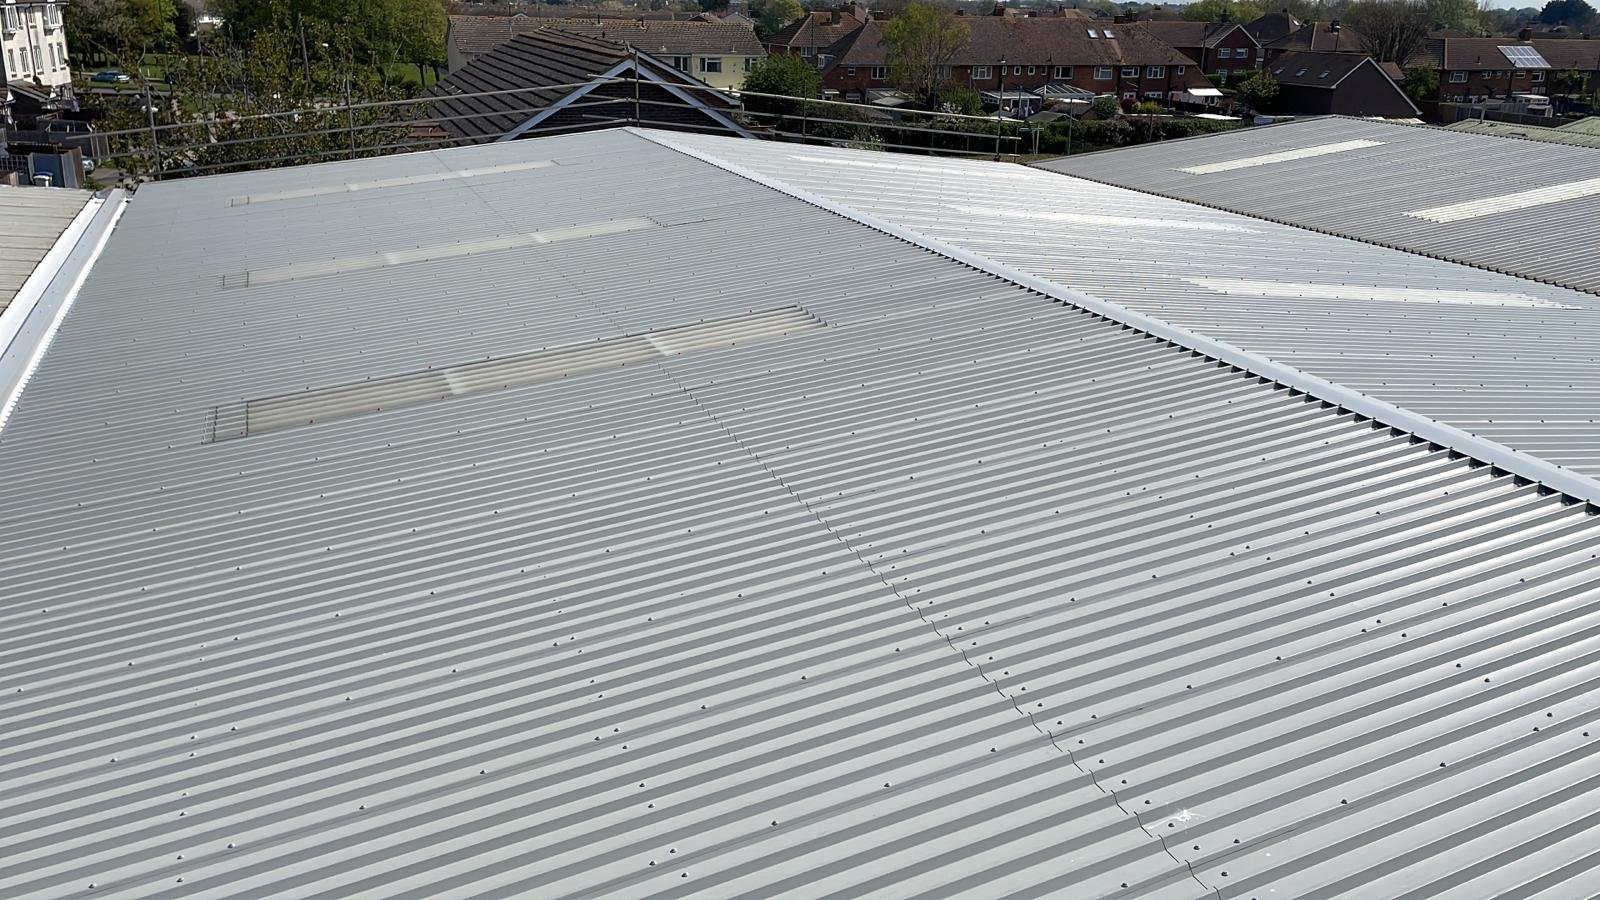 Over-roofing to a Warehouse roof in Littlehampton, West Sussex